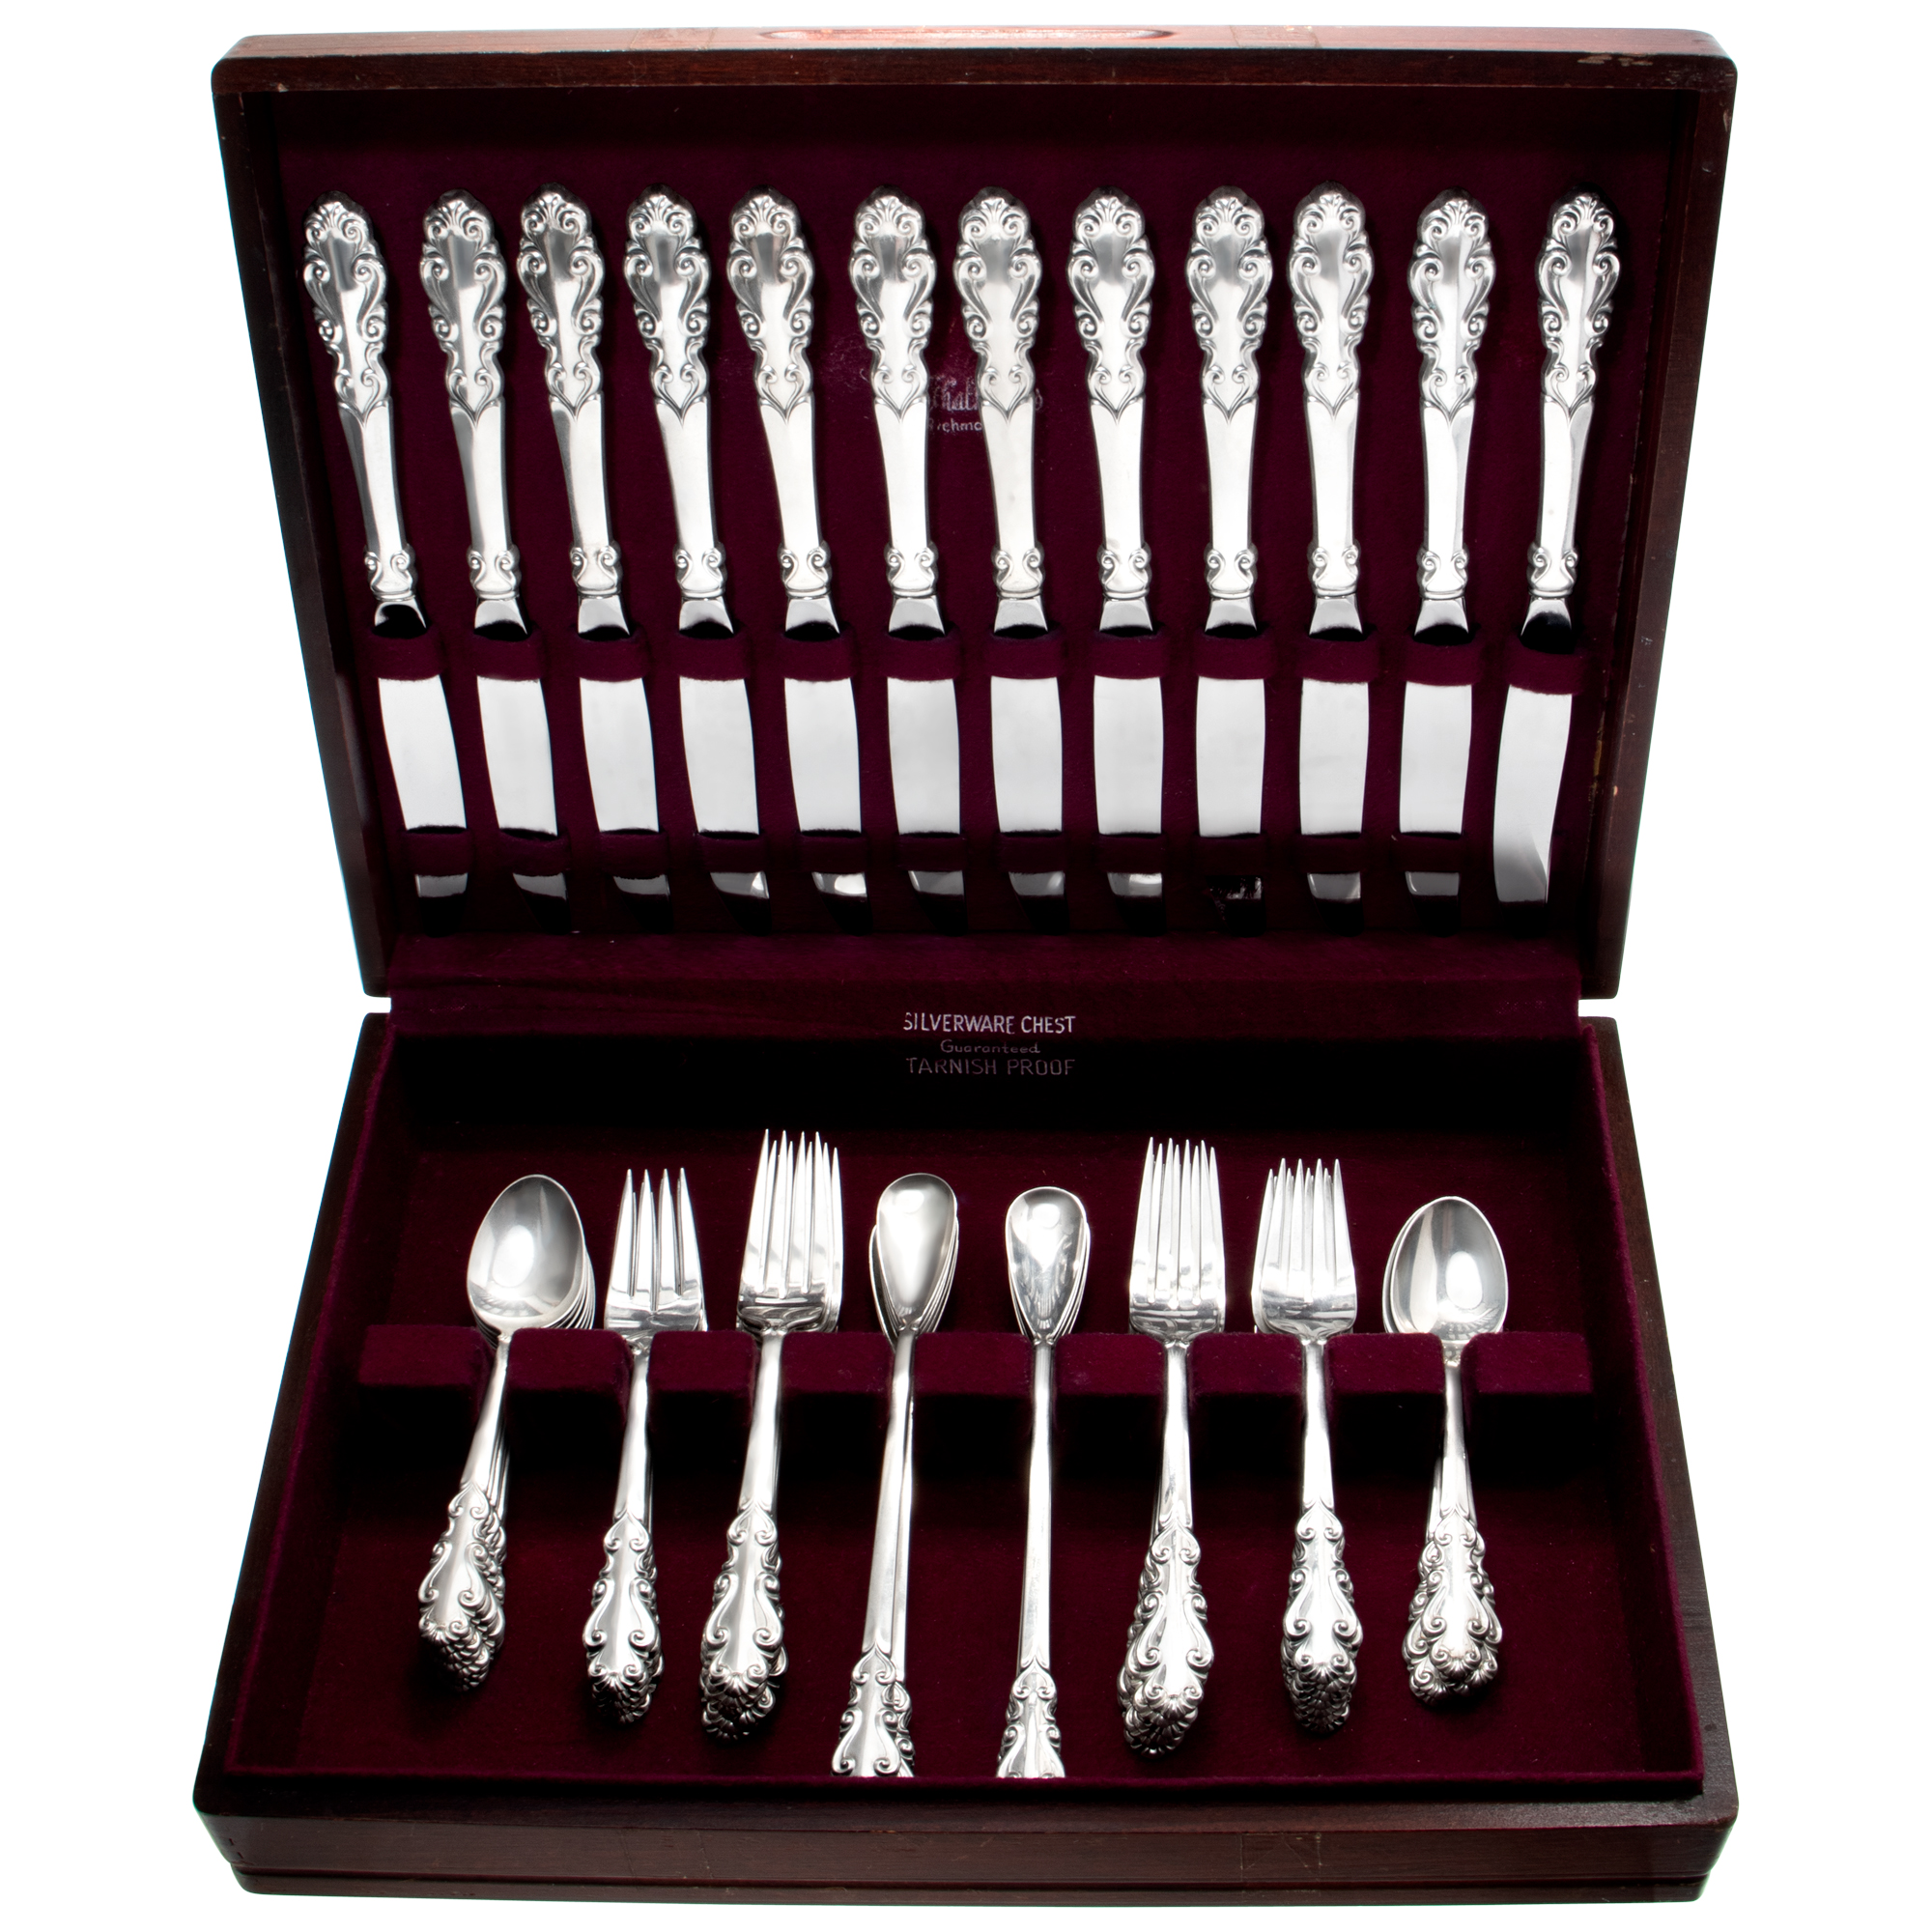 ESPLANADE Sterling silver flatware set patented in 1952 by Towle Silversmiths. 5 place settings for 12-. Over 66 troy ounce sterling silver. image 1